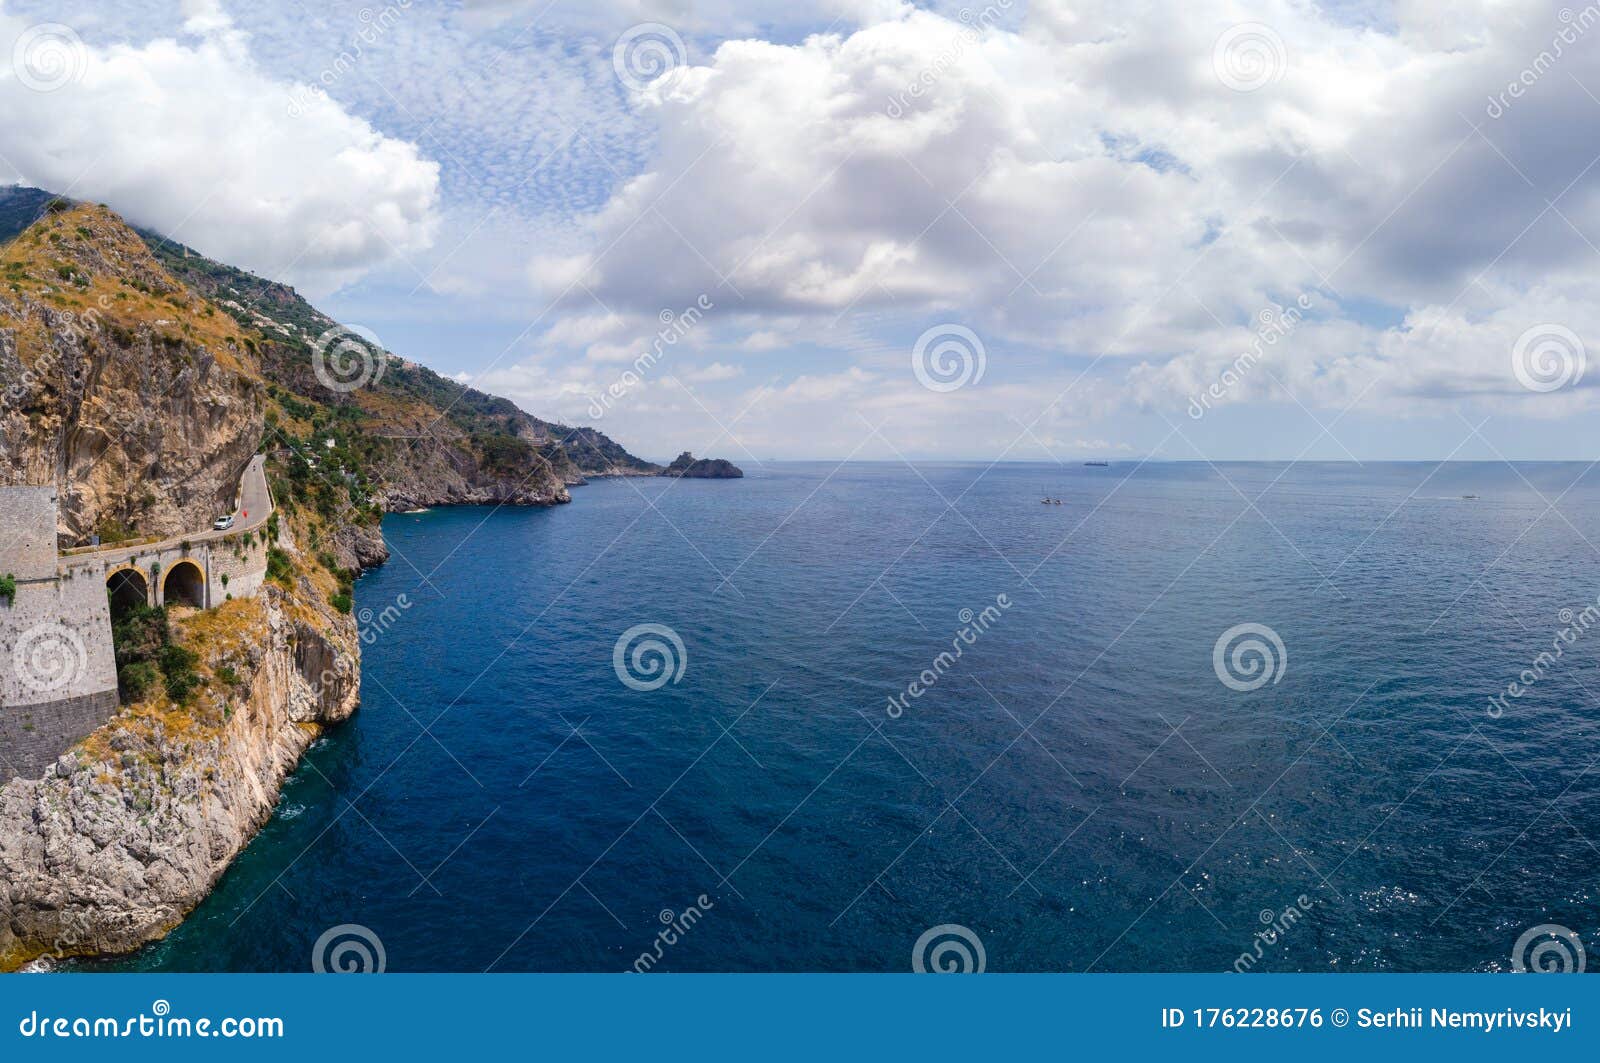 aerial view of fiordo di furore beach. incredible beauty panorama of a paradise. the rocky seashore of southern italy. sunny